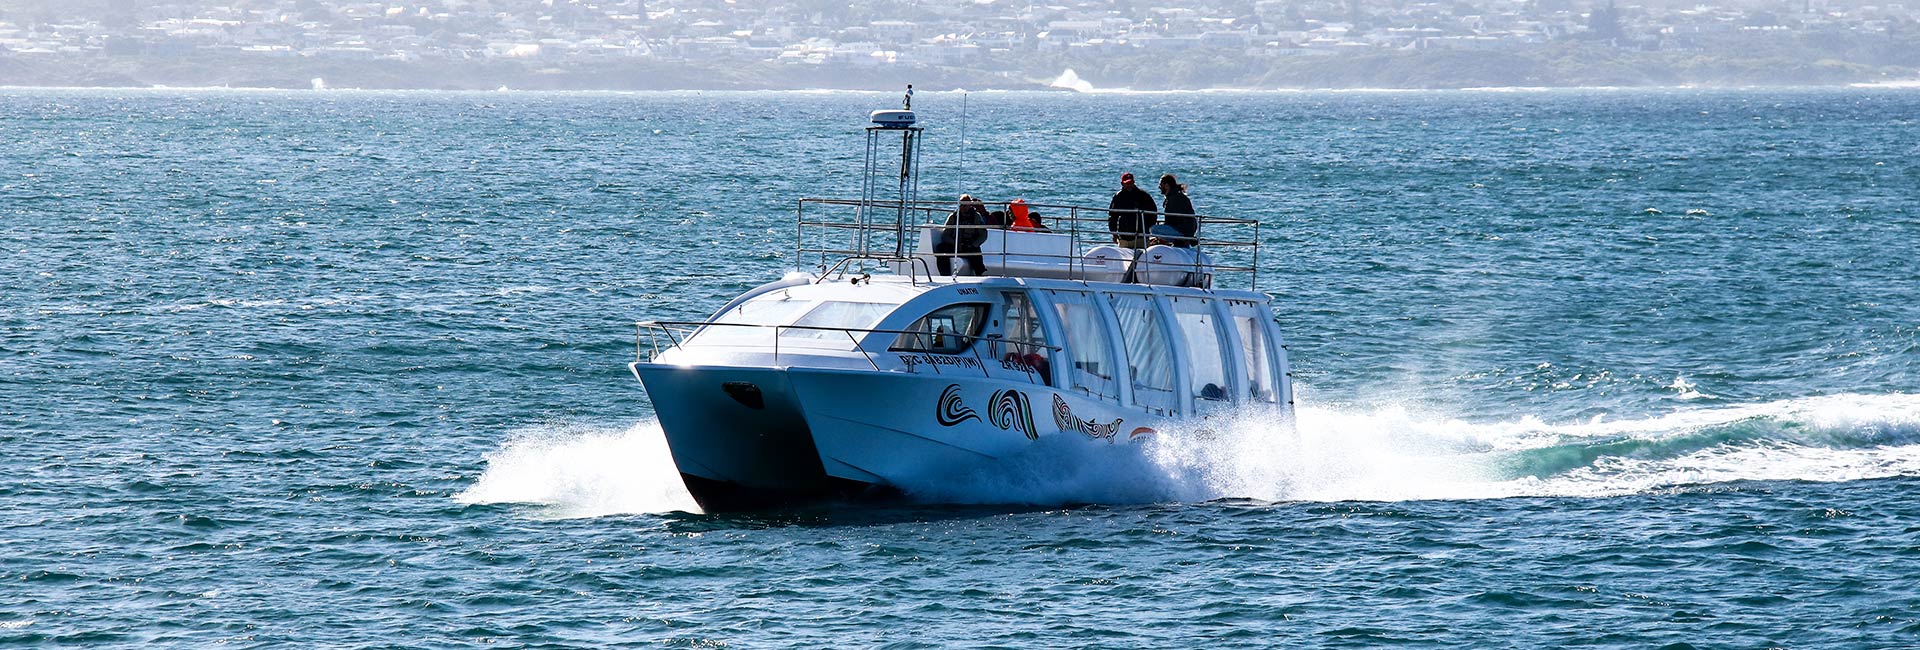 whale watching boat header 600